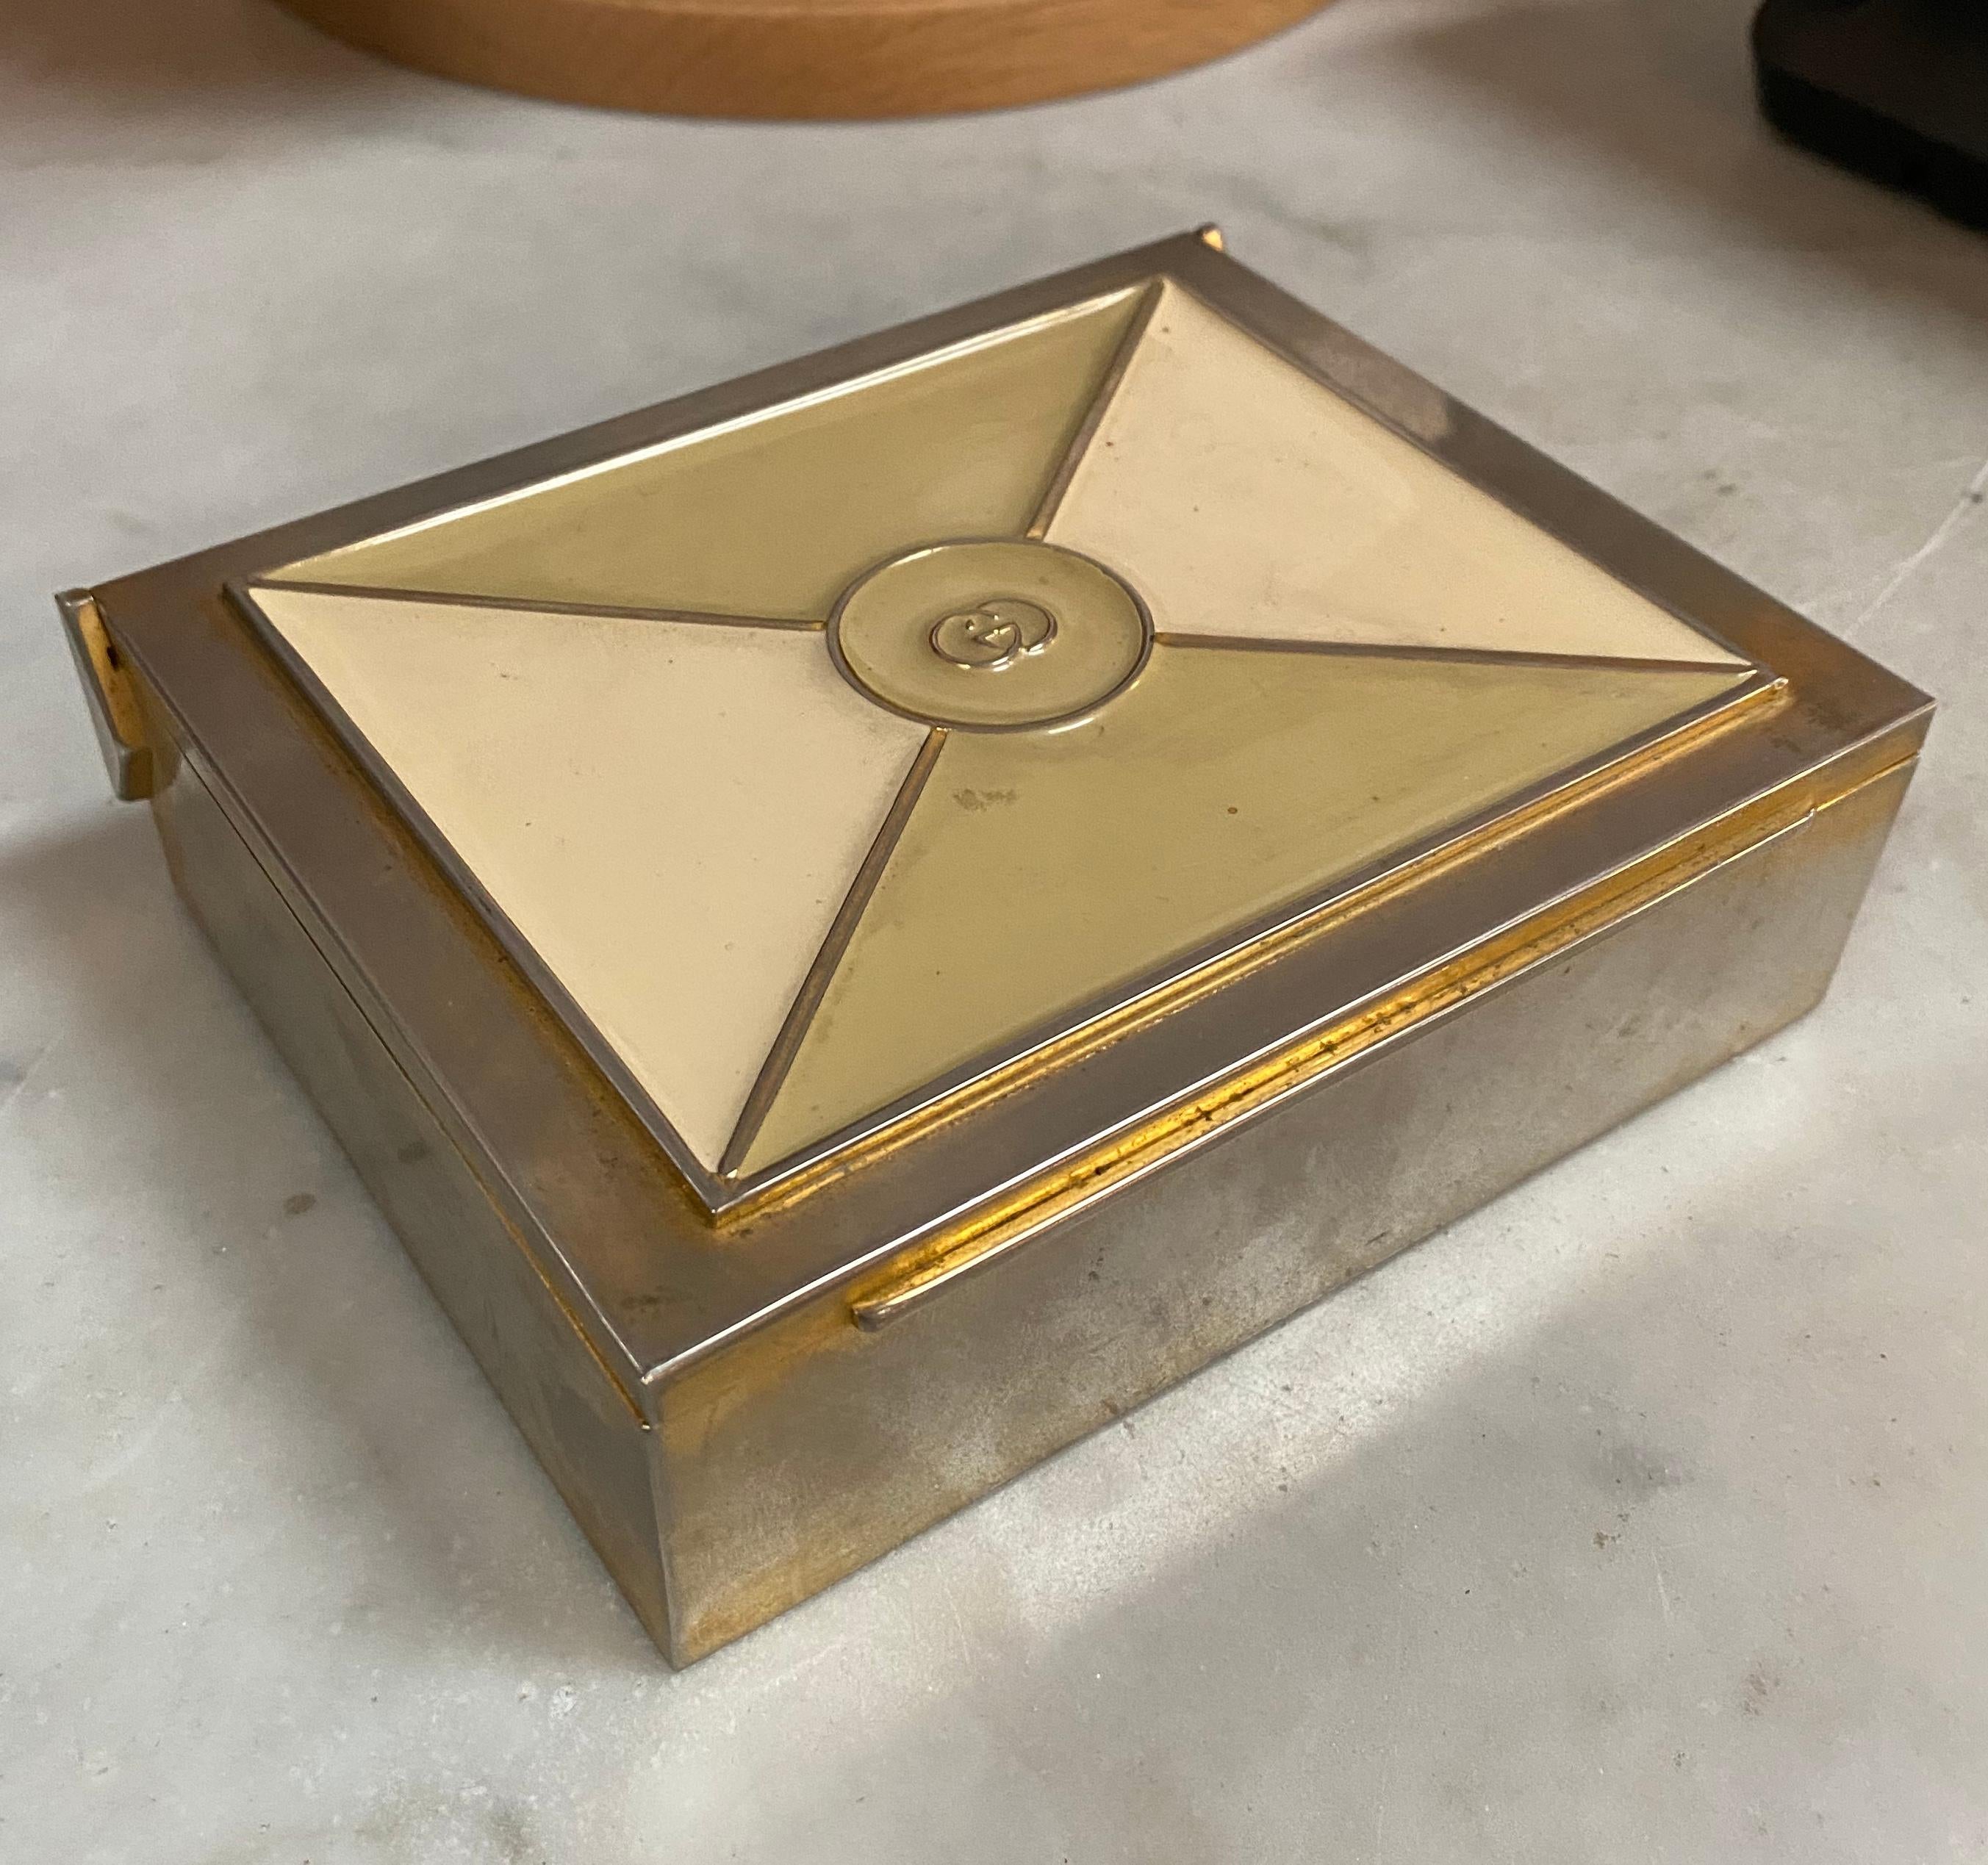 Silver Gucci box Italy 1970s signed on the bottom.